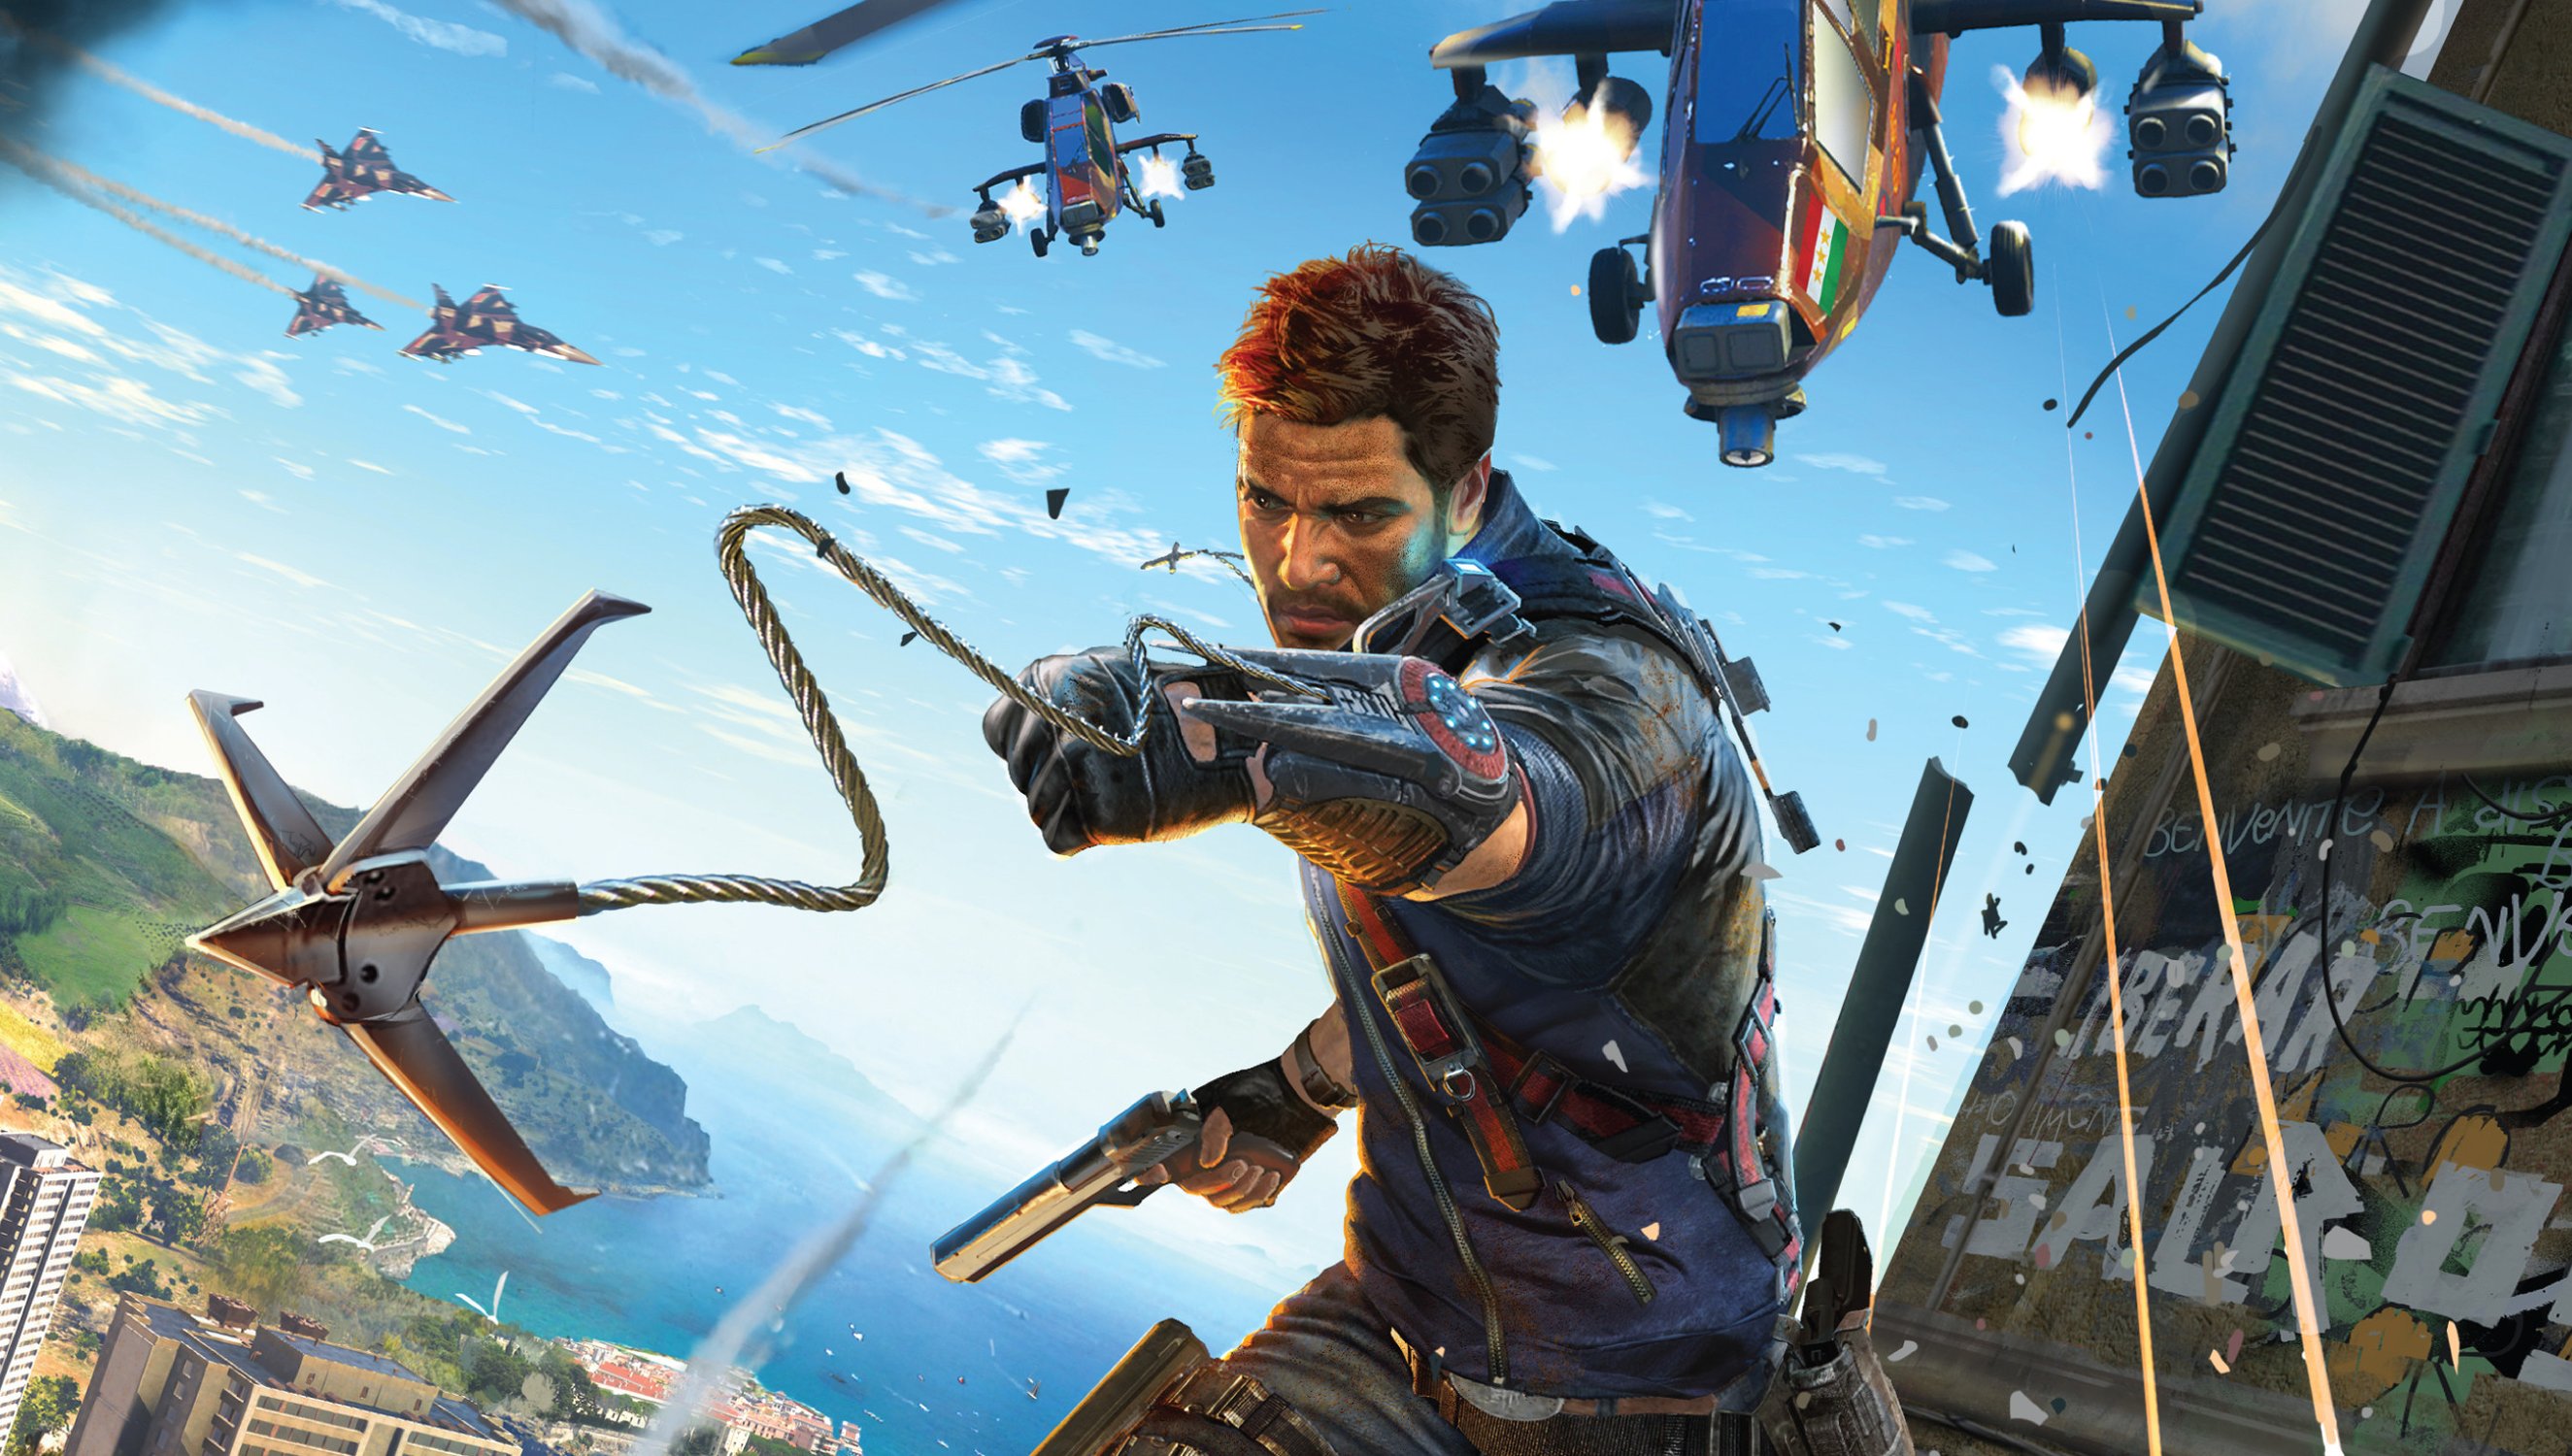 LOAD FILE: ‘JUST CAUSE 3’ HAS A TOUGH TIME KEEPING UP WITH ITS OWN HAVOC